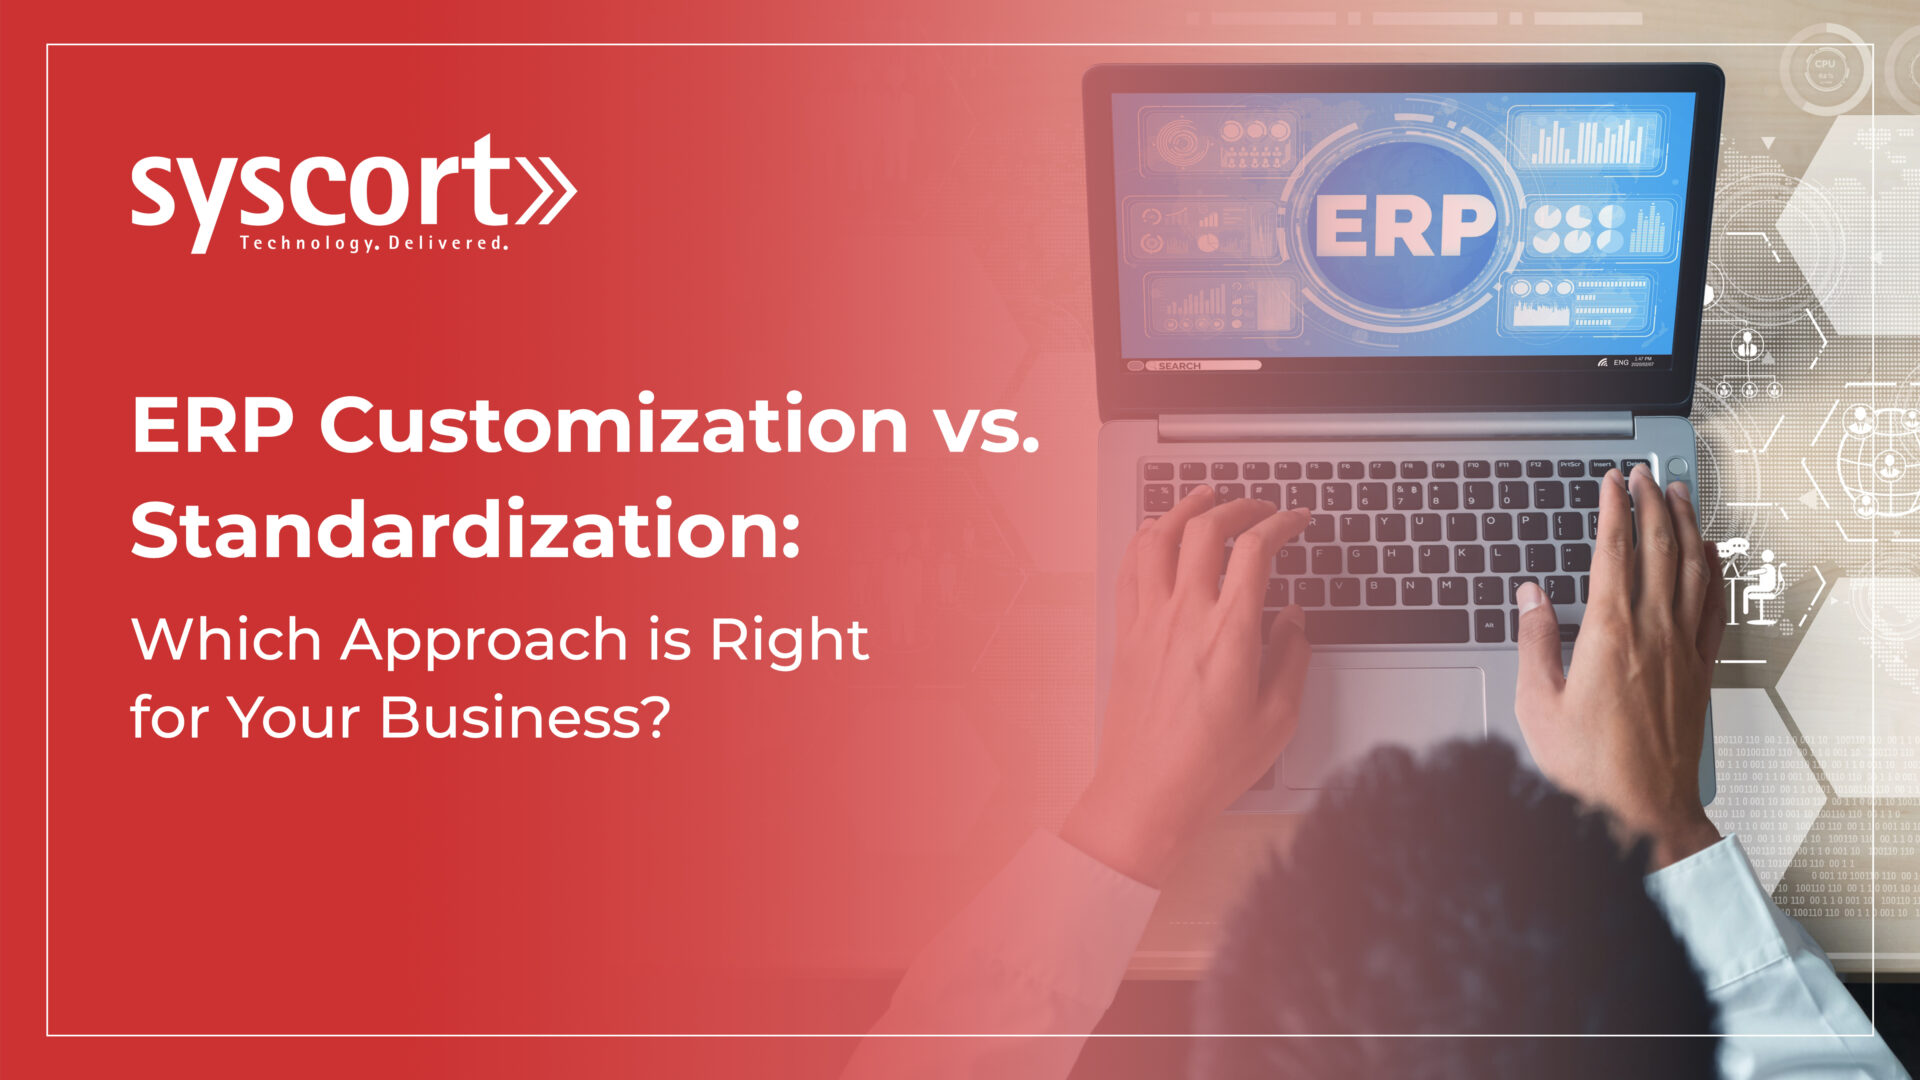 ERP Customization vs. Standardization: Which Approach is Right for Your Business?